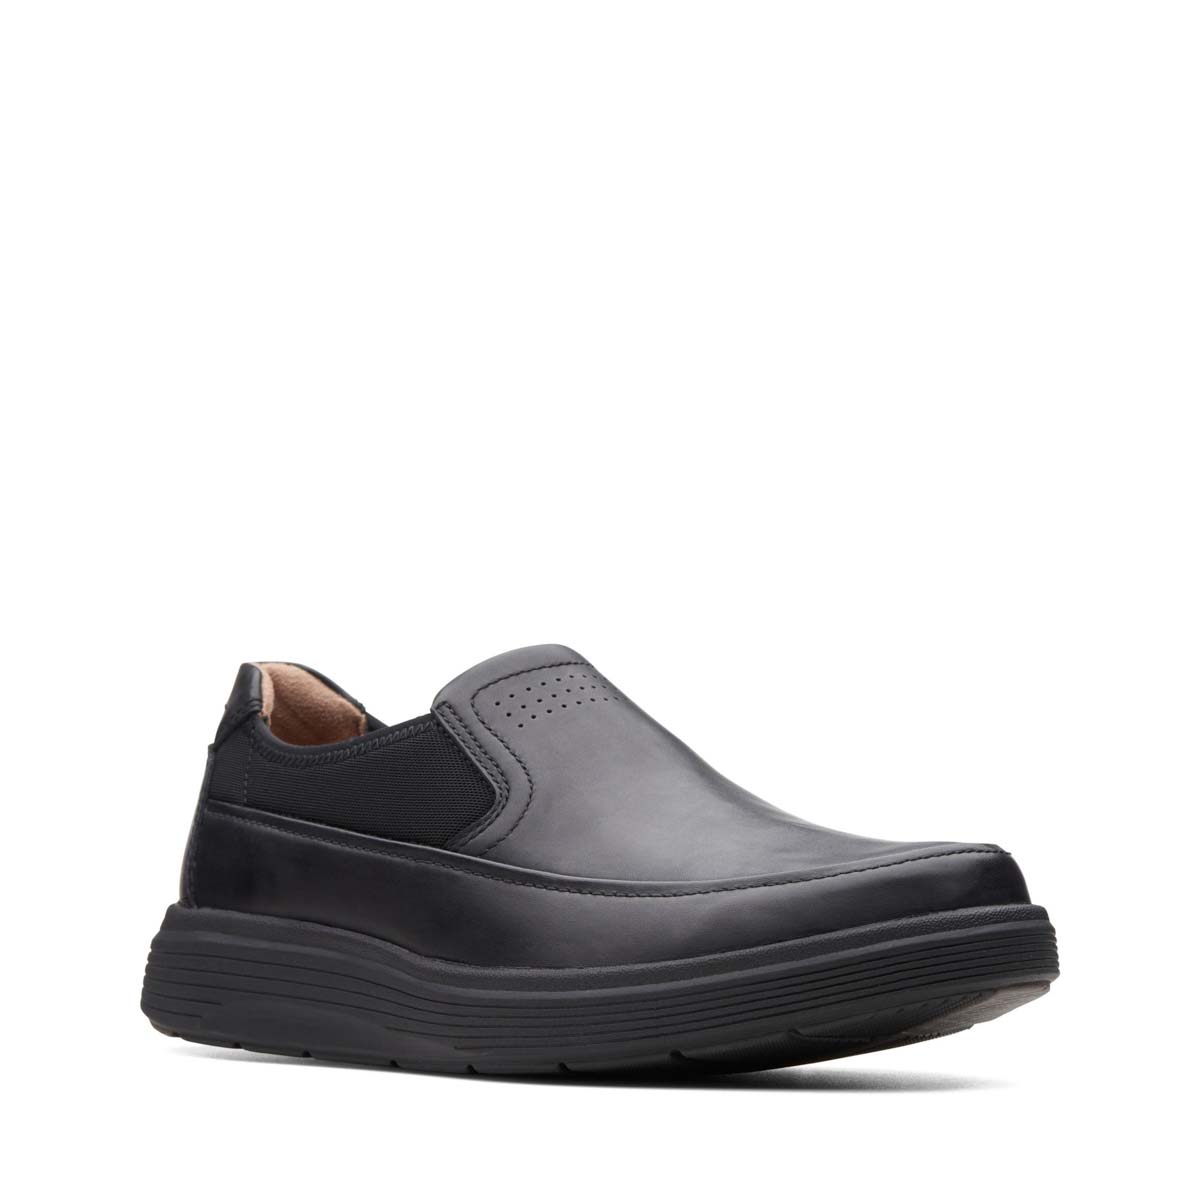 Clarks Un Abode Go Black Leather Mens Slip-On Shoes 370767G In Size 7 In Plain Black Leather G Width Fitting